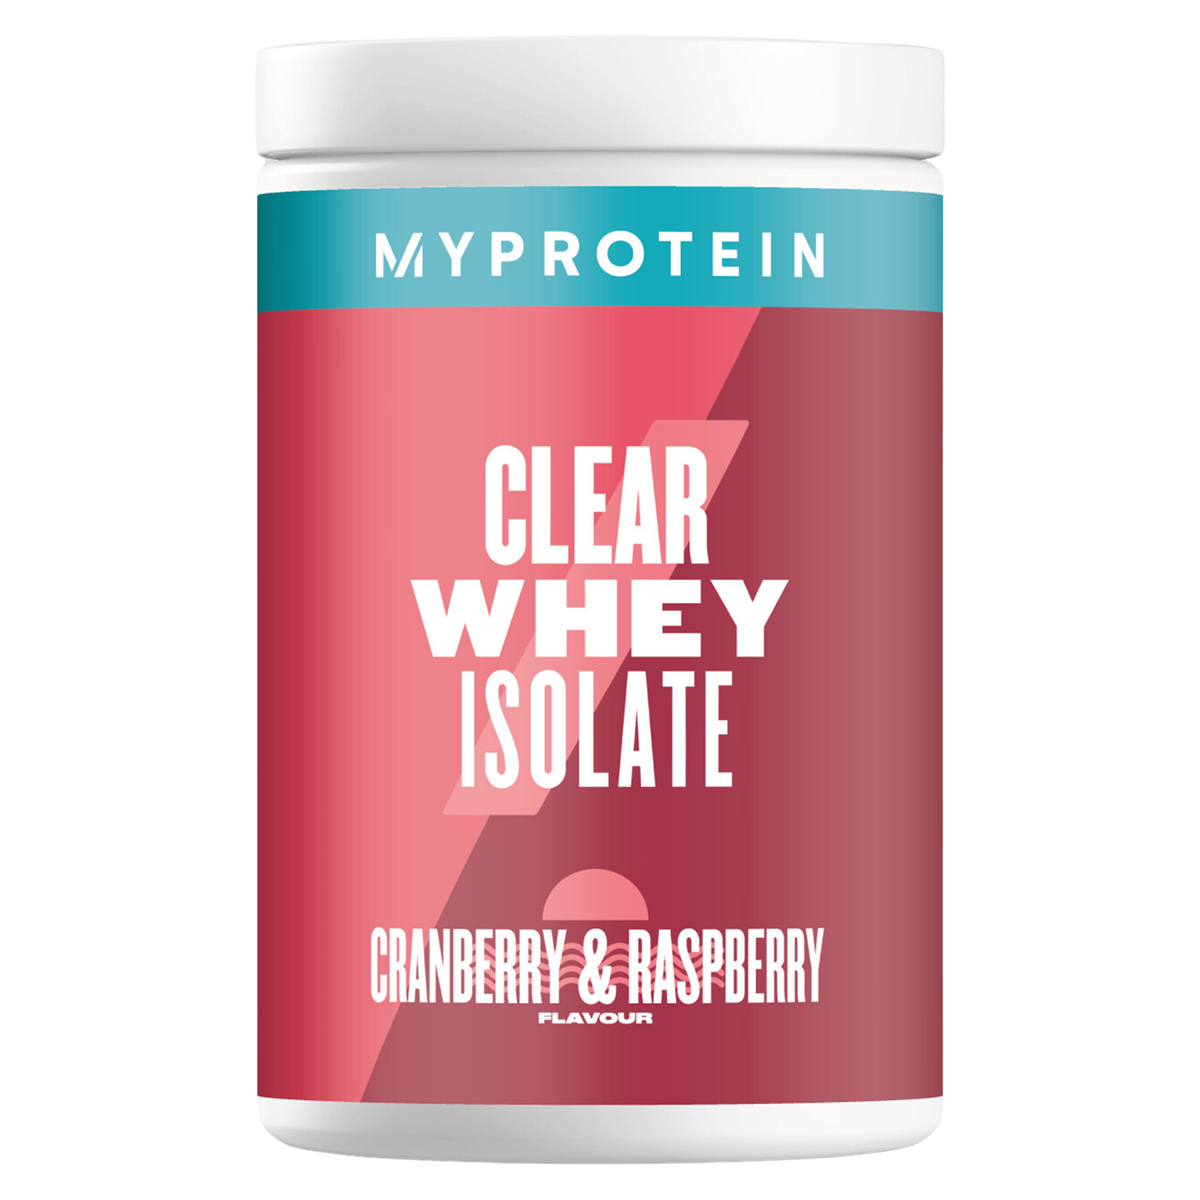 MYPROTEIN Clear Whey Isolate - Super Nutrition